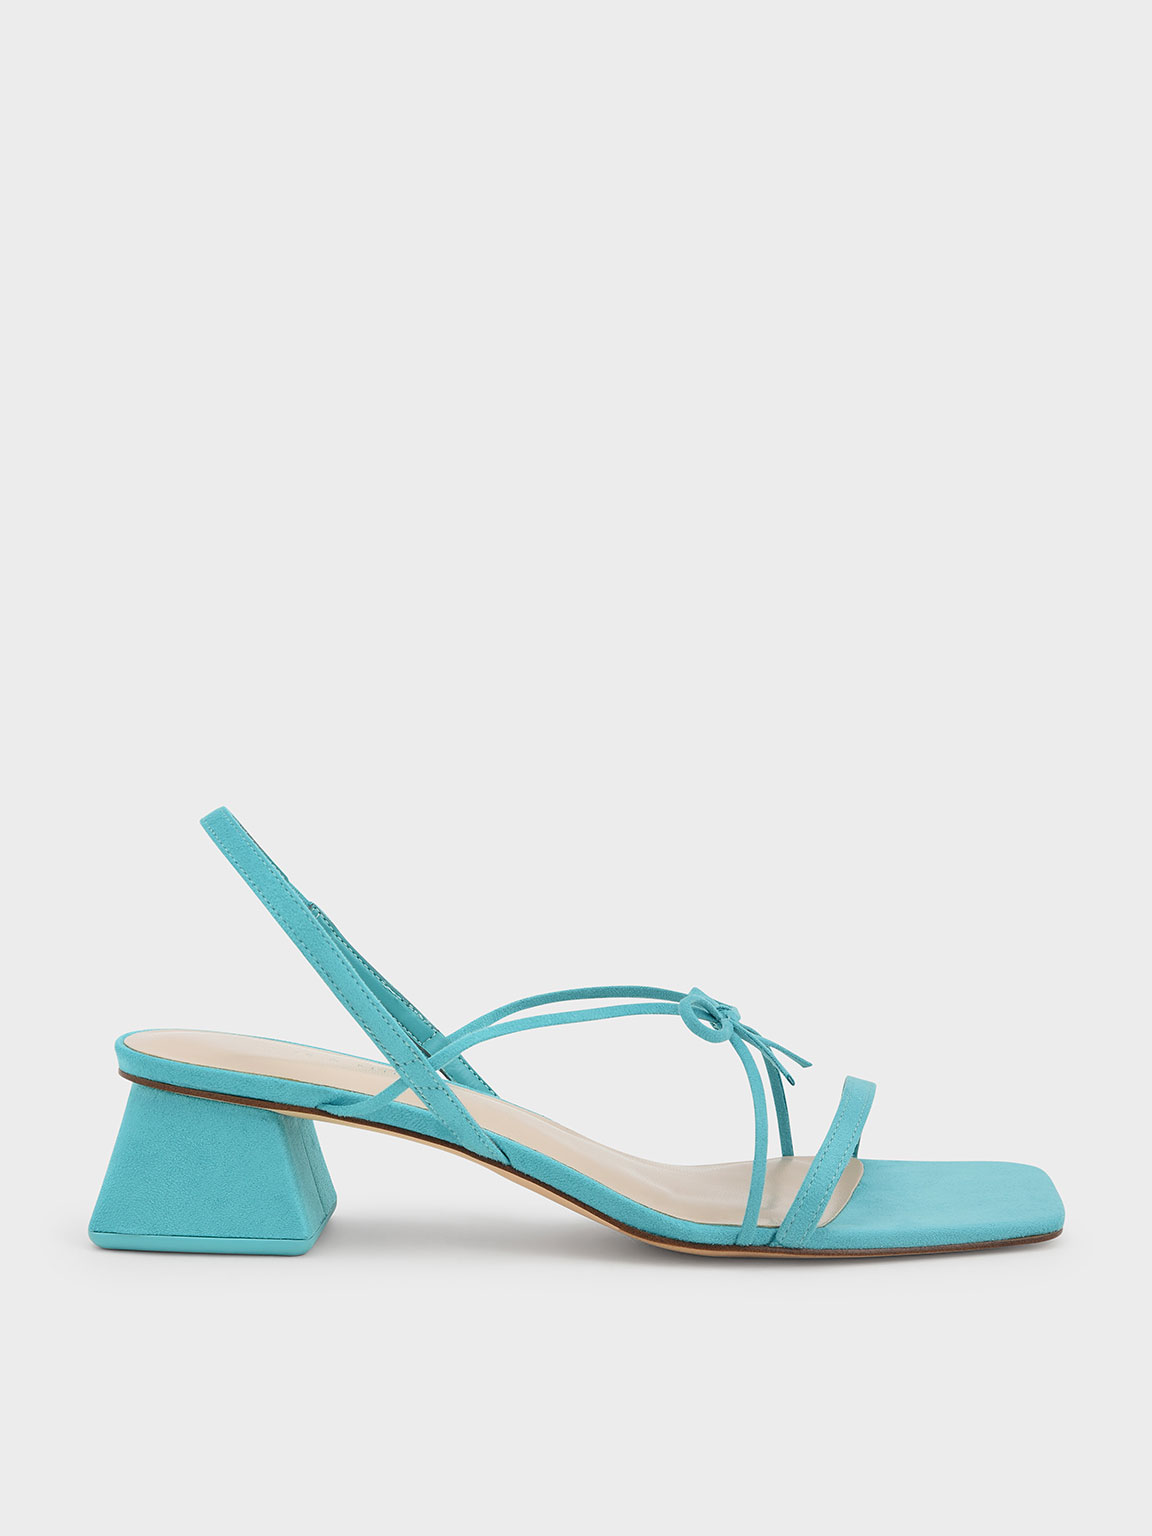 Turquoise Strappy Bow Textured Slingback Sandals - CHARLES & KEITH KH